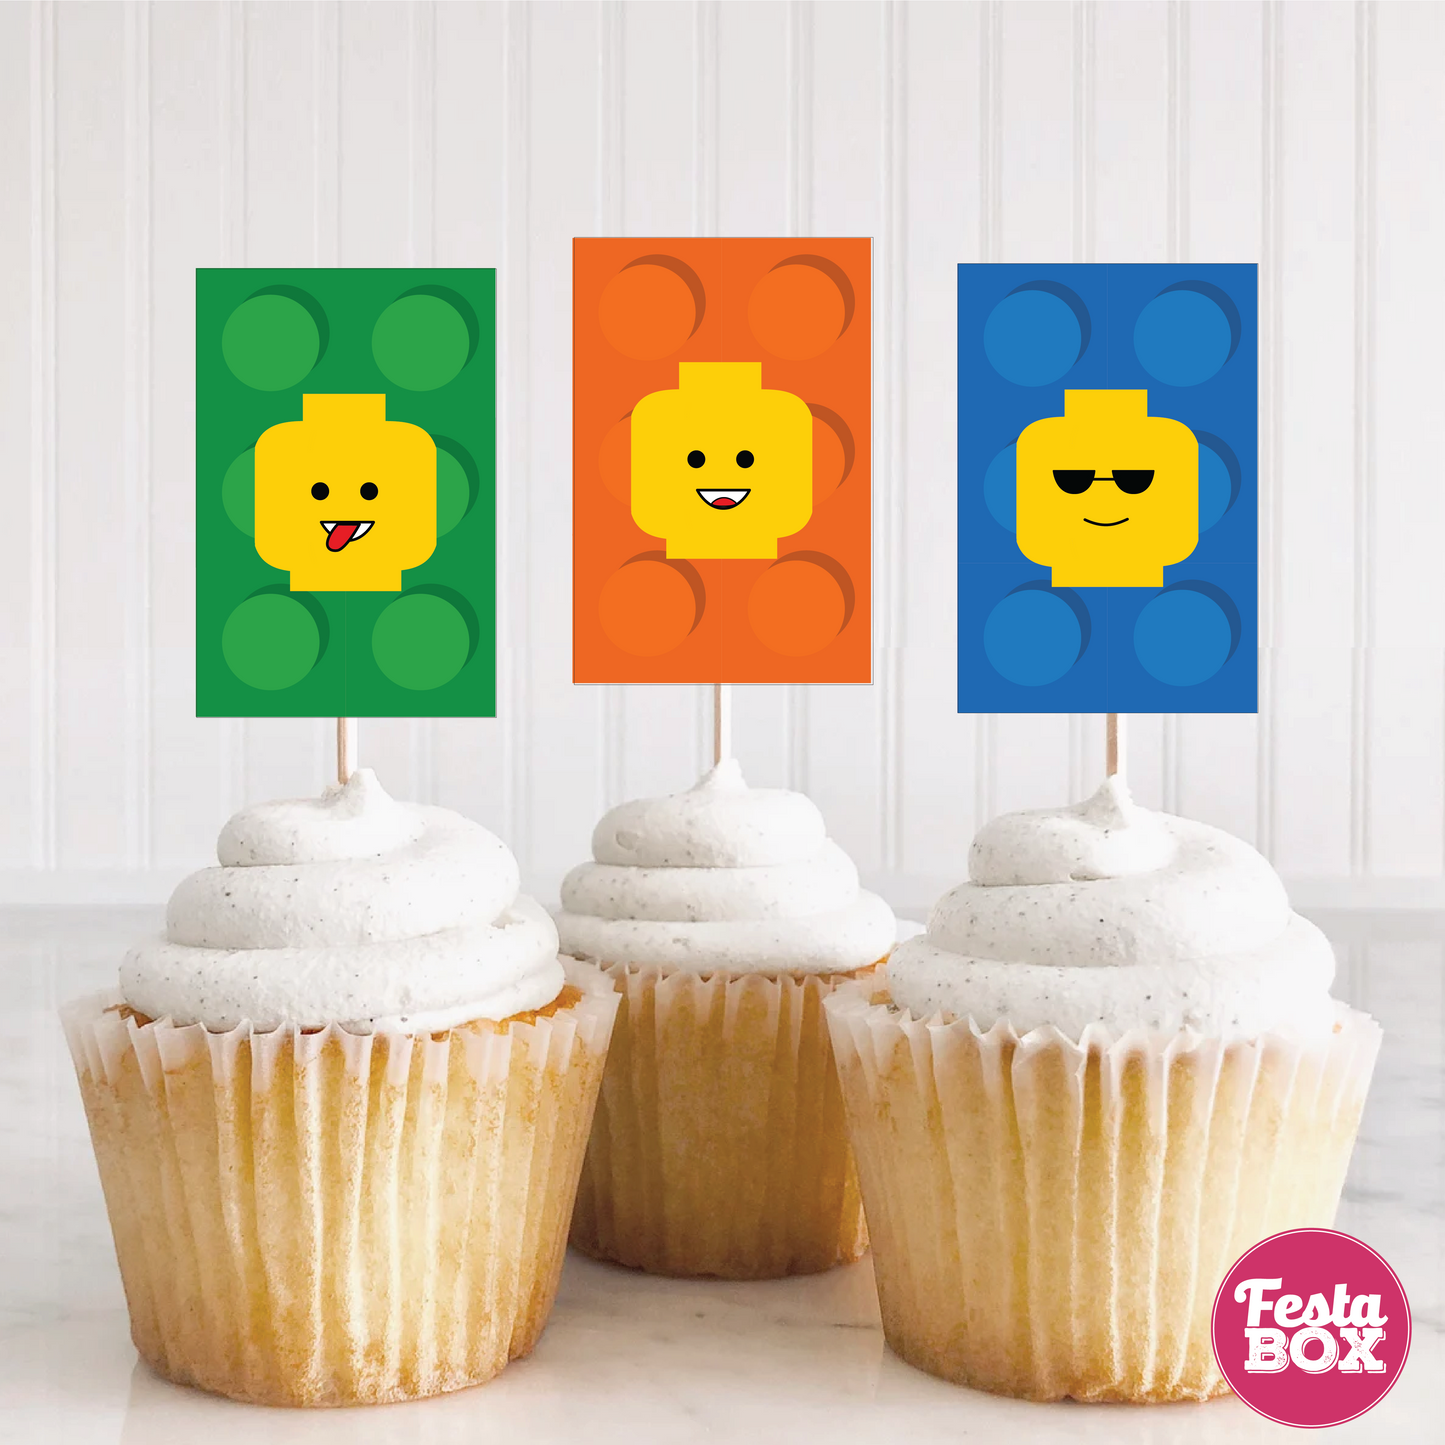 Cupcake Toppers - Lego Theme